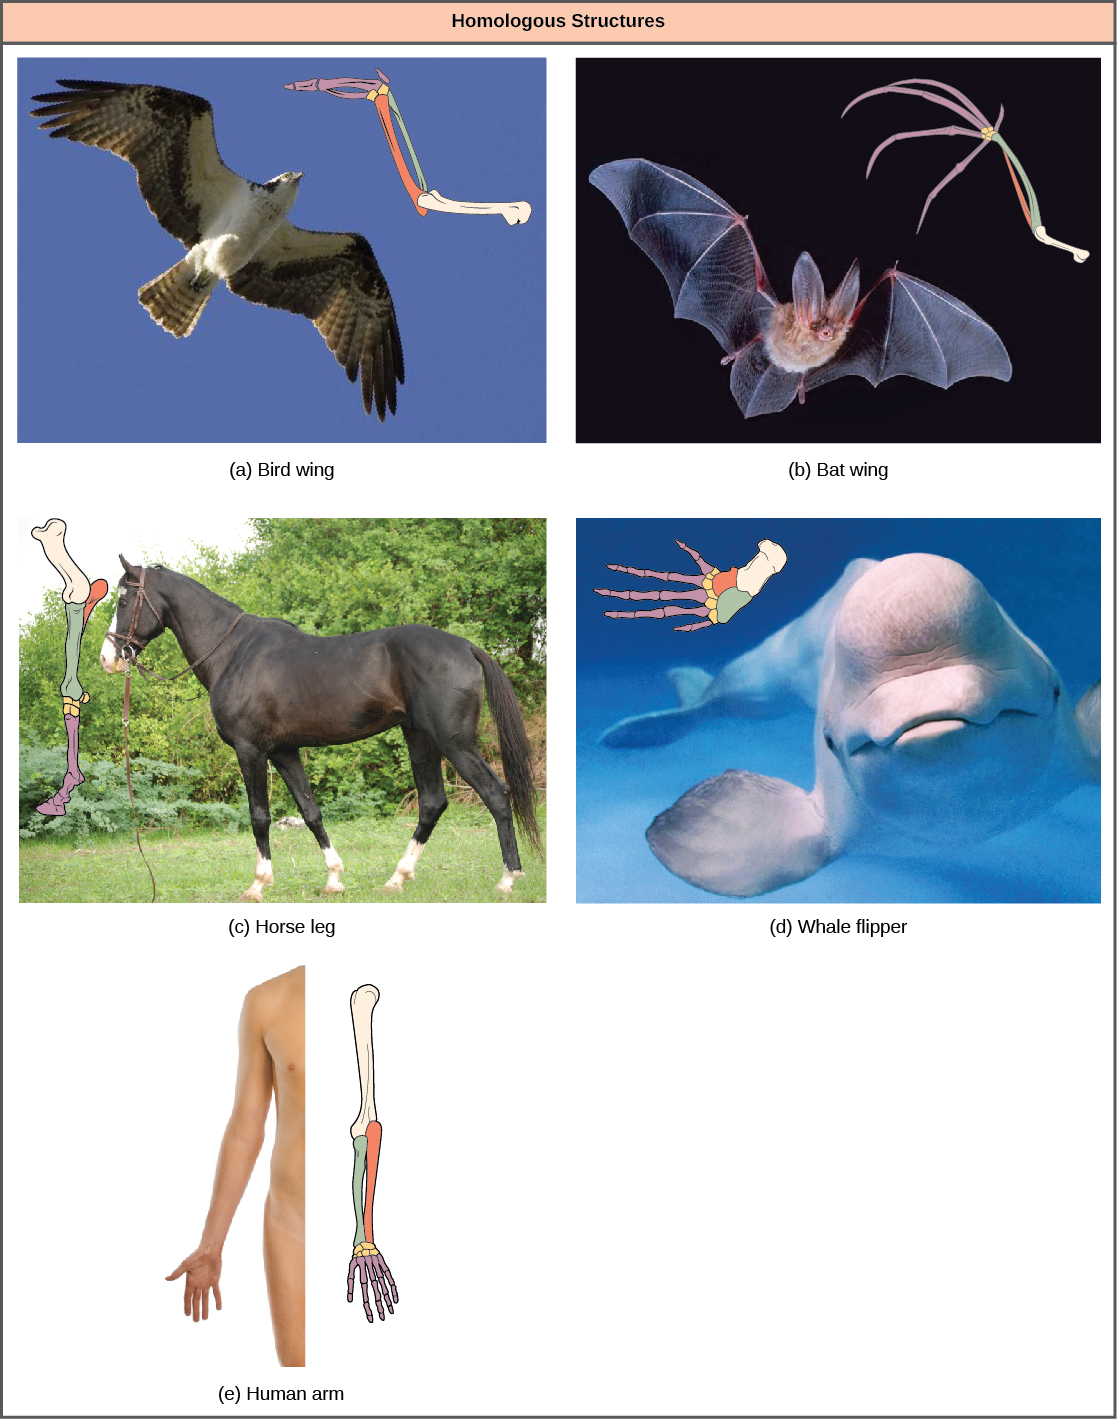 Photo A shows a bird in flight, with a corresponding drawing of bird wing bones. Photo B shows a bat in flight with a corresponding drawing of bat wing bones. Photo C shows a horse, with a corresponding drawing of front leg bones. Photo D shows a beluga whale, with a corresponding drawing of flipper bones. Photo E shows a human arm, with a corresponding drawing of arm bones. All the limbs share common bones, analogous to the bones in the arms and fingers of humans. However, in the bat wing, finger bones are long and separate and form a scaffolding on which the wing’s membrane is stretched. In the bird wing, the finger bones are fused together. In the horse leg, the ulna is shortened and is fused to the radius. The hand bones are reduced to one long thick bone and the finger bones are reduced to one long thick finger with a modified nail or hoof. In the whale flipper, the humerus, ulna, and radius are very short and thick.